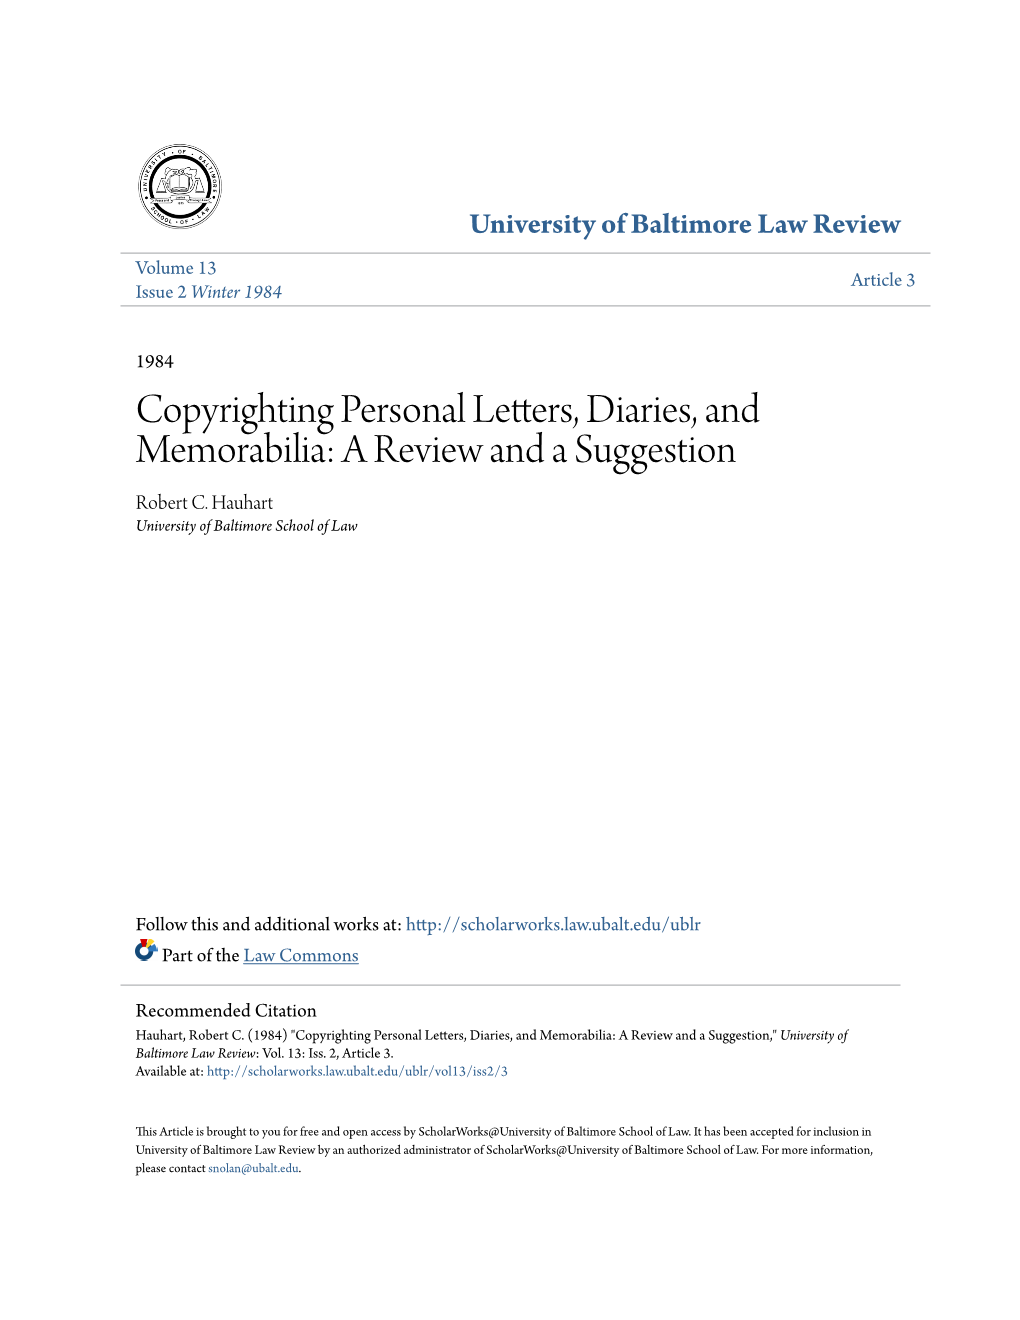 Copyrighting Personal Letters, Diaries, and Memorabilia: a Review and a Suggestion Robert C